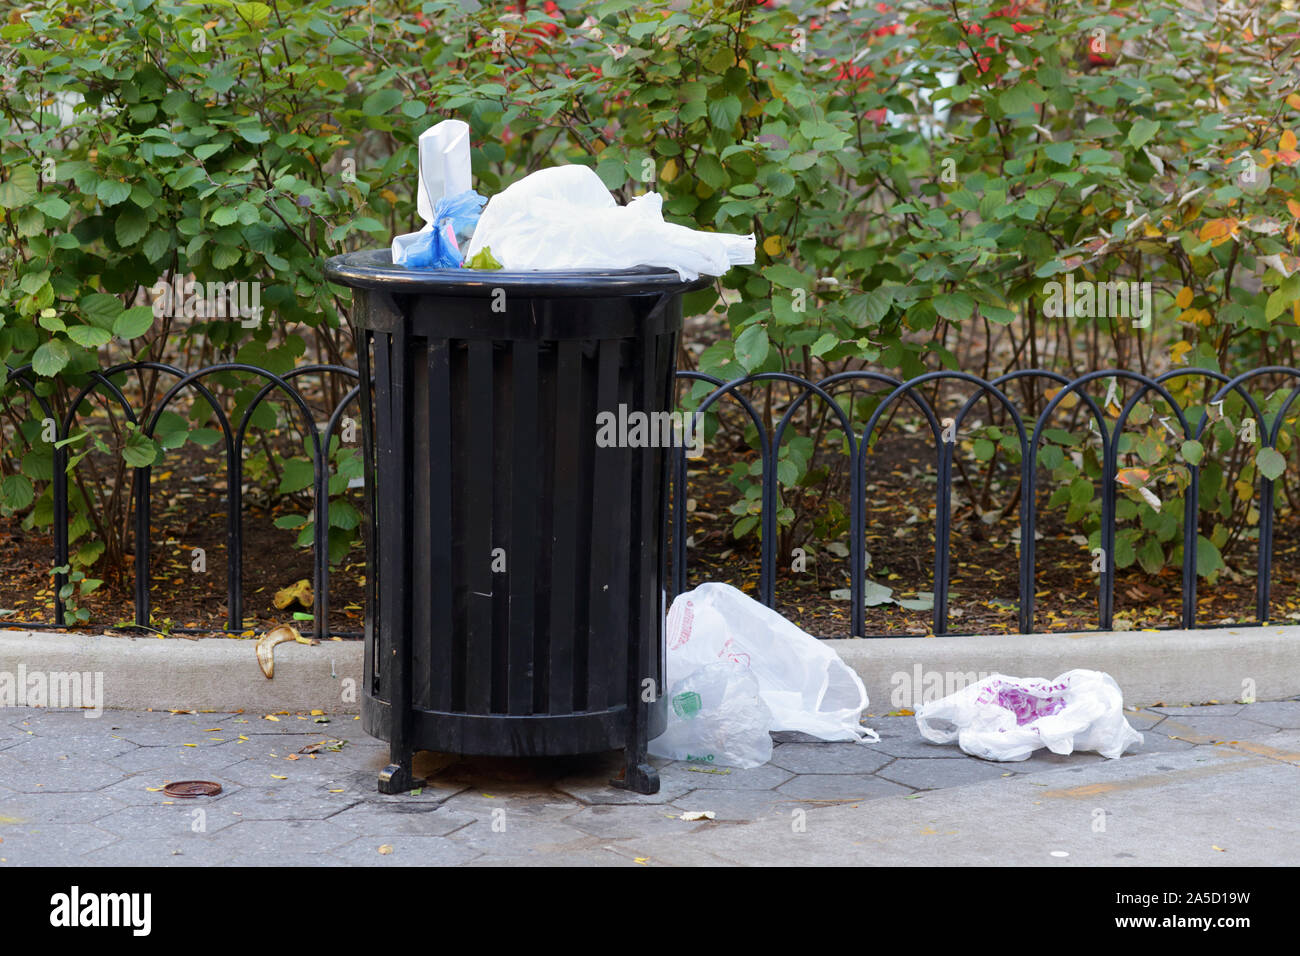 Single-use plastic bags loose on the ground near a garbage can. Stock Photo